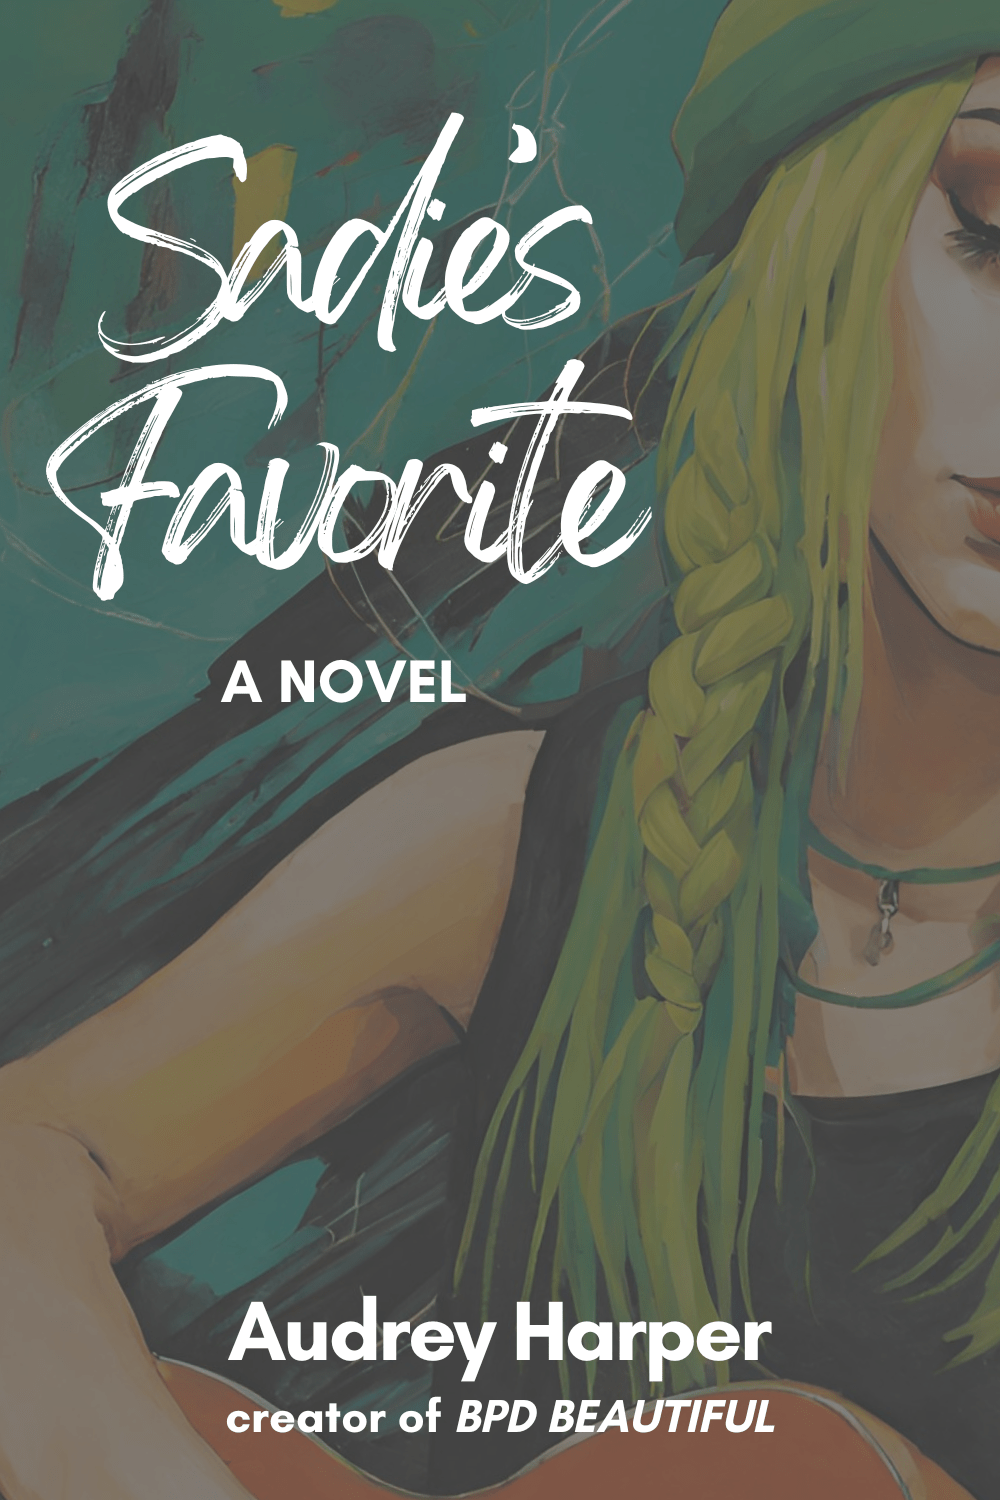 Borderline stories by Audrey Harper. Sadie's Favorite book cover shows a painting of girl with green hair holding a guitar. This is a book about bpd, a novel featuring a woman recovering from borderline personality disorder.